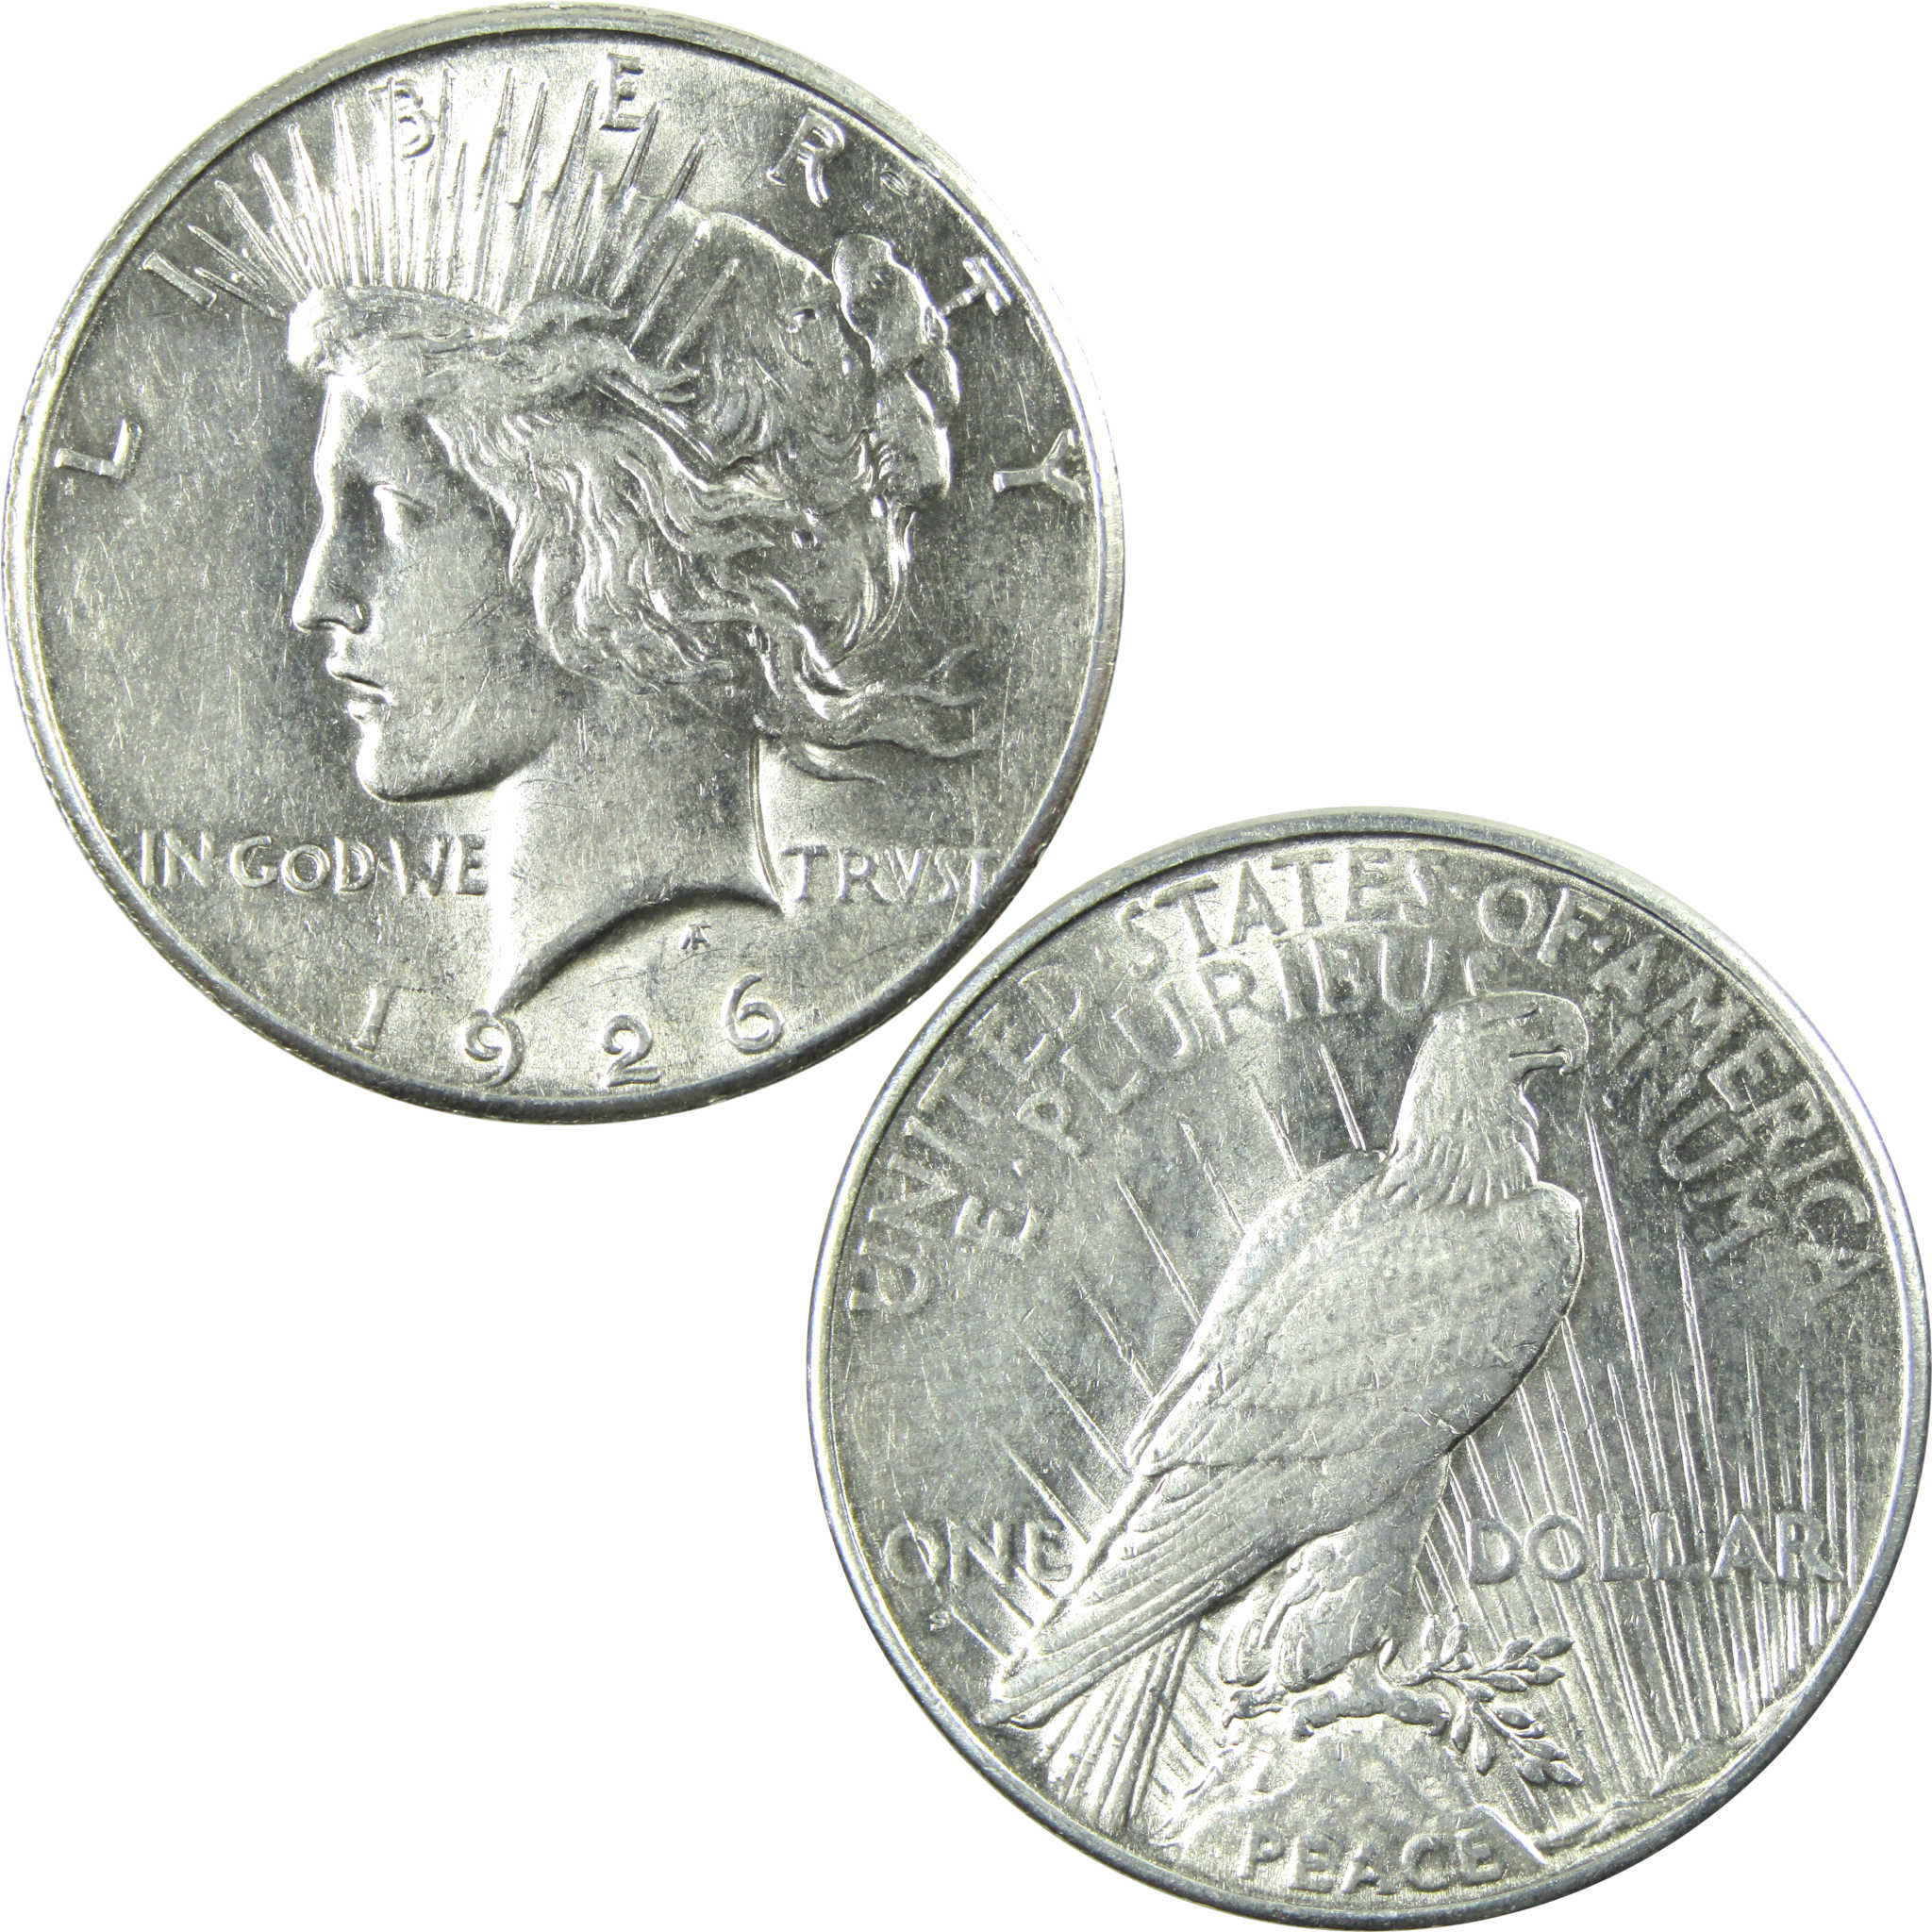 1926 S Peace Dollar AU About Uncirculated Silver $1 Coin SKU:I13890